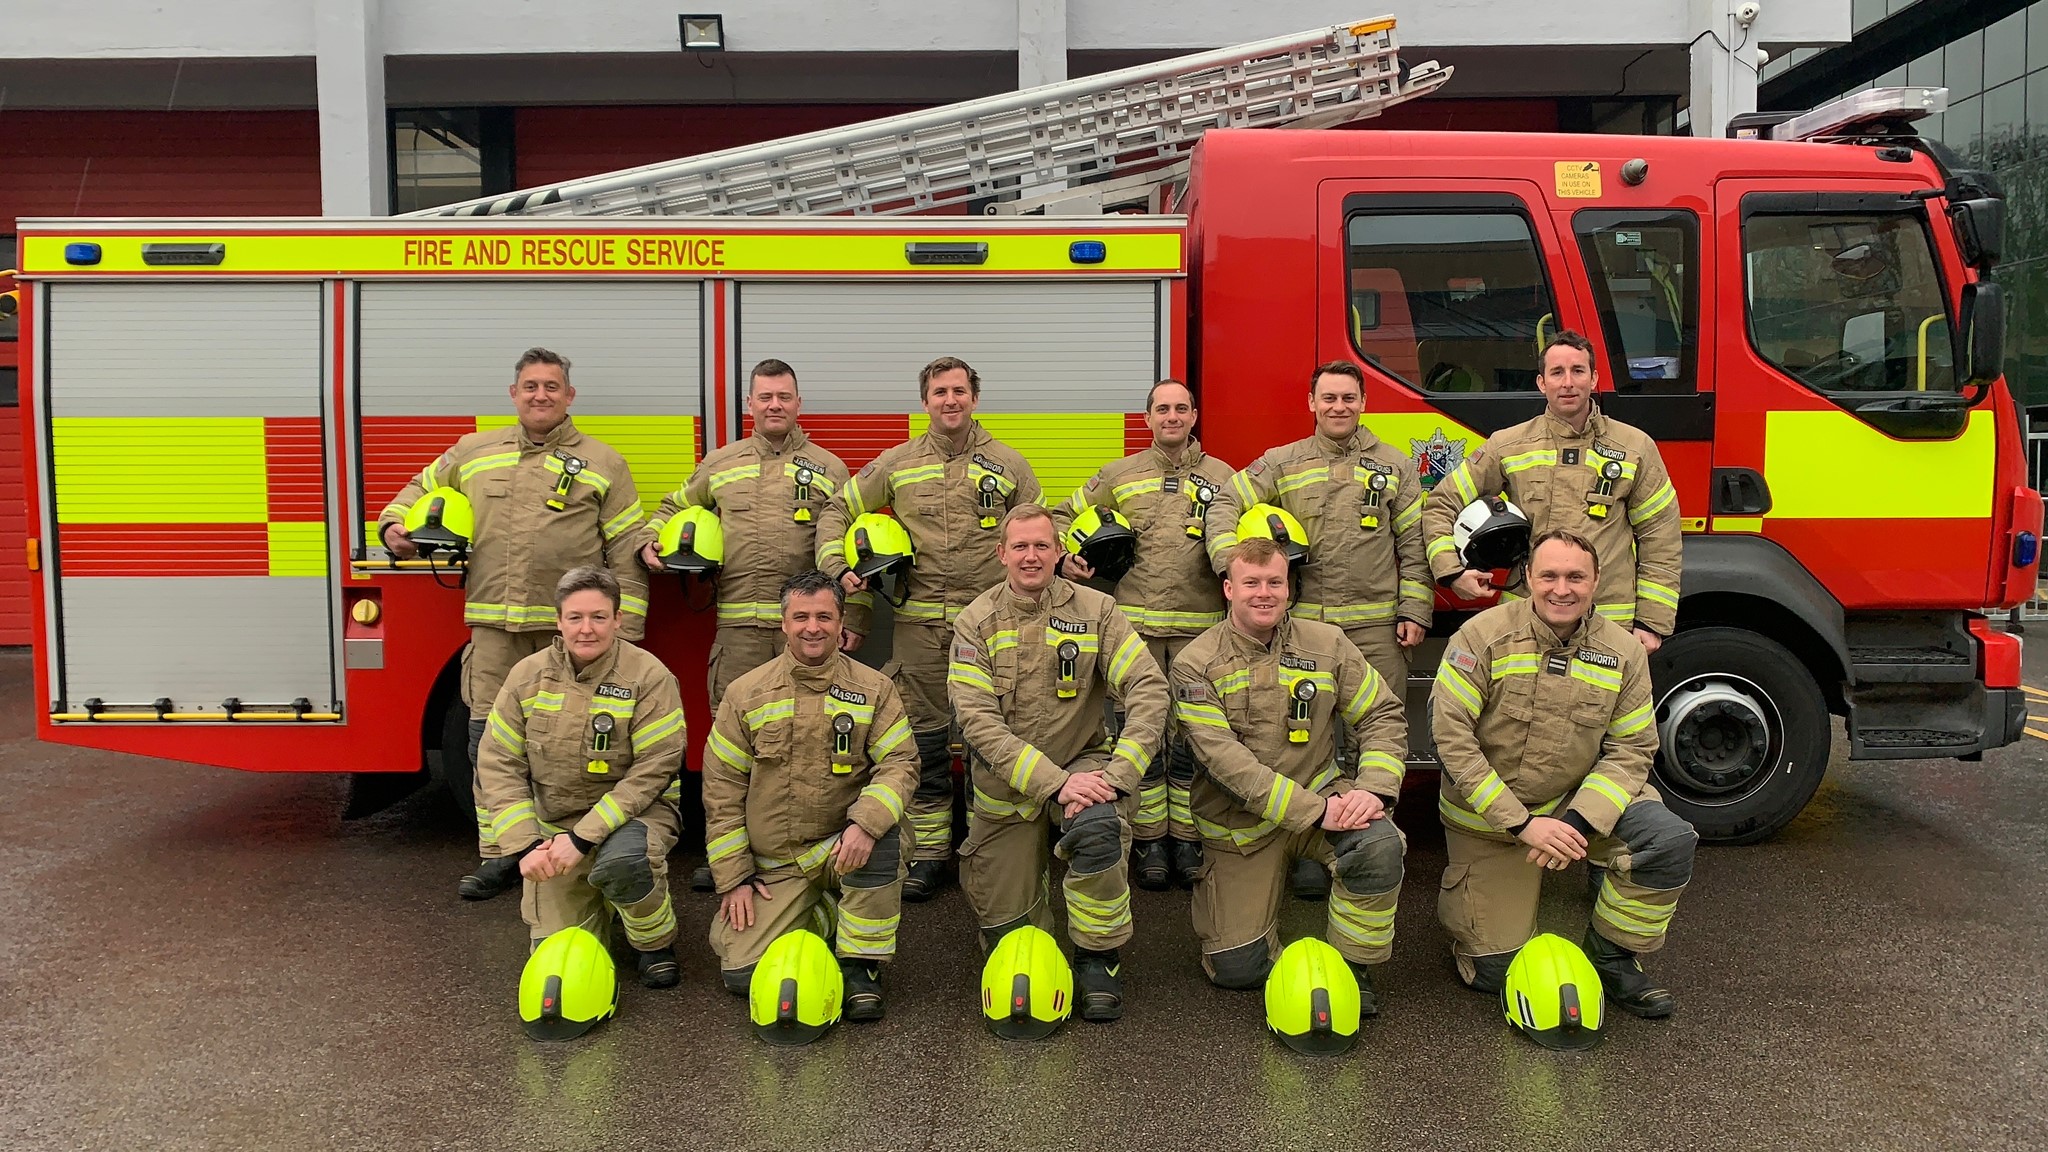 Firefighters to run 200-mile relay round 25 stations in aid of us